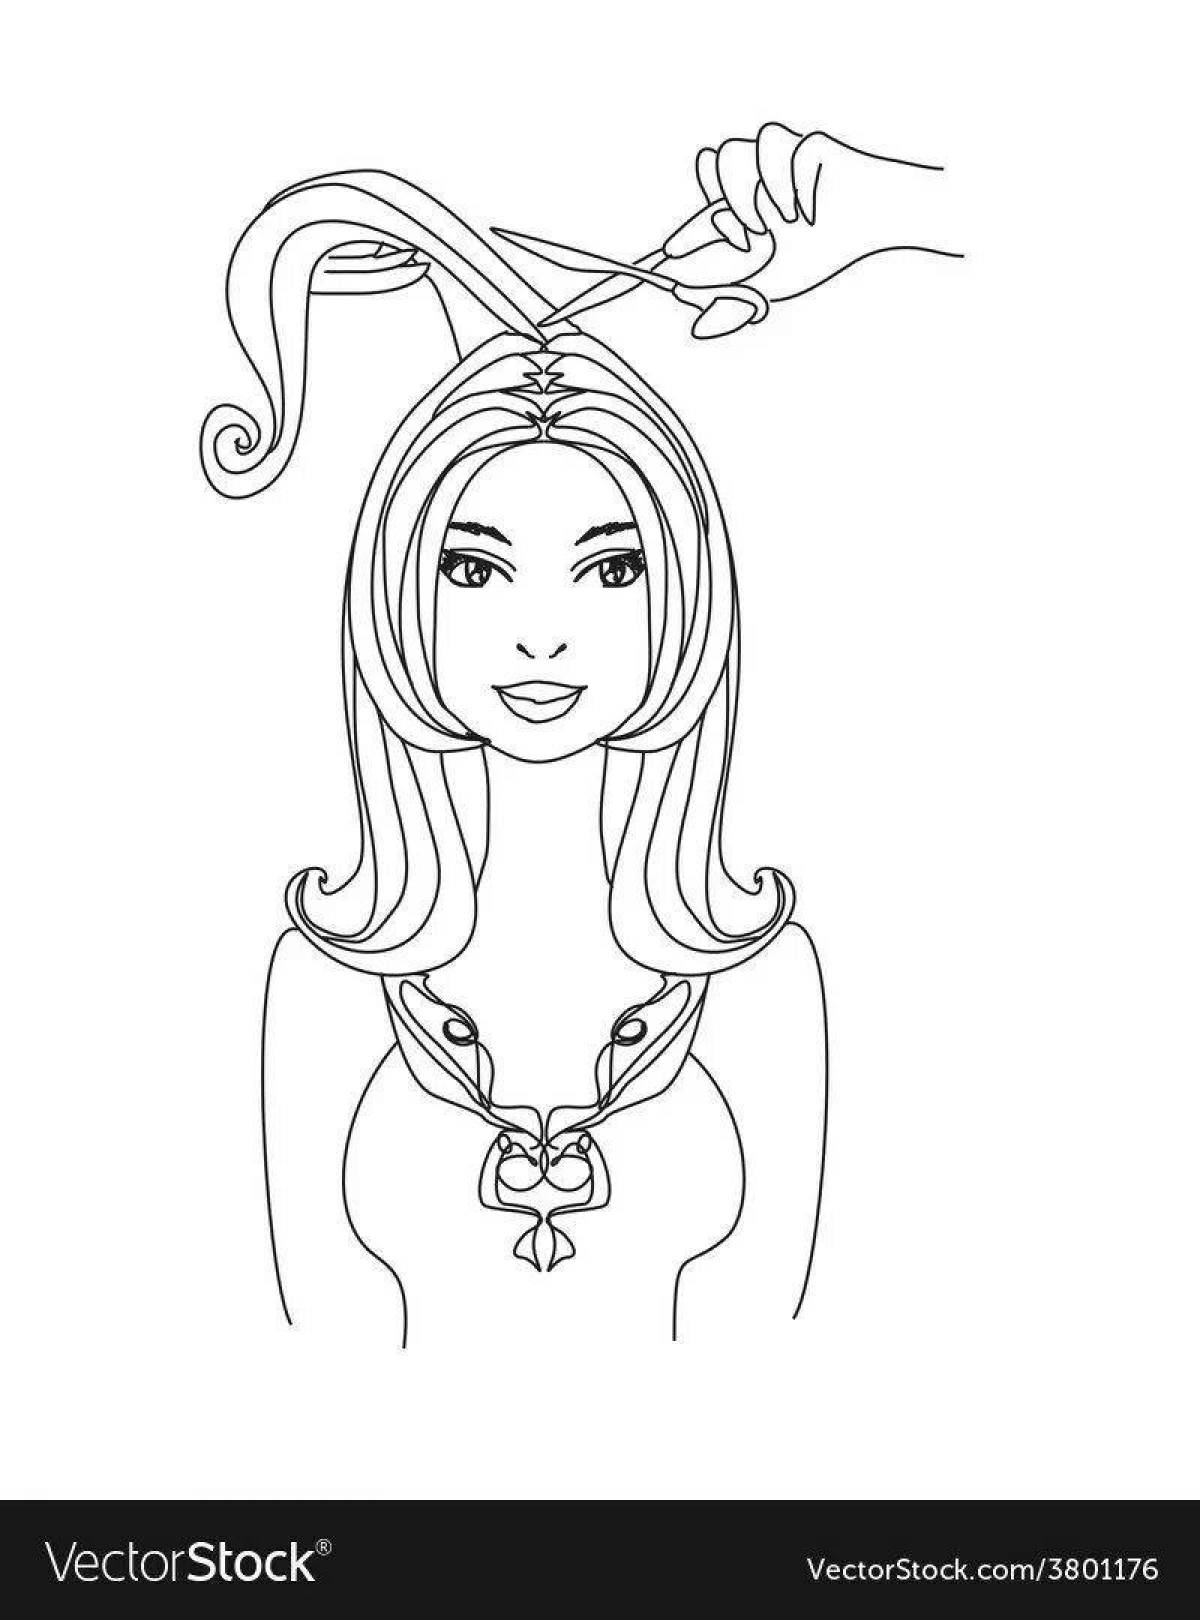 Coloring page striking cut